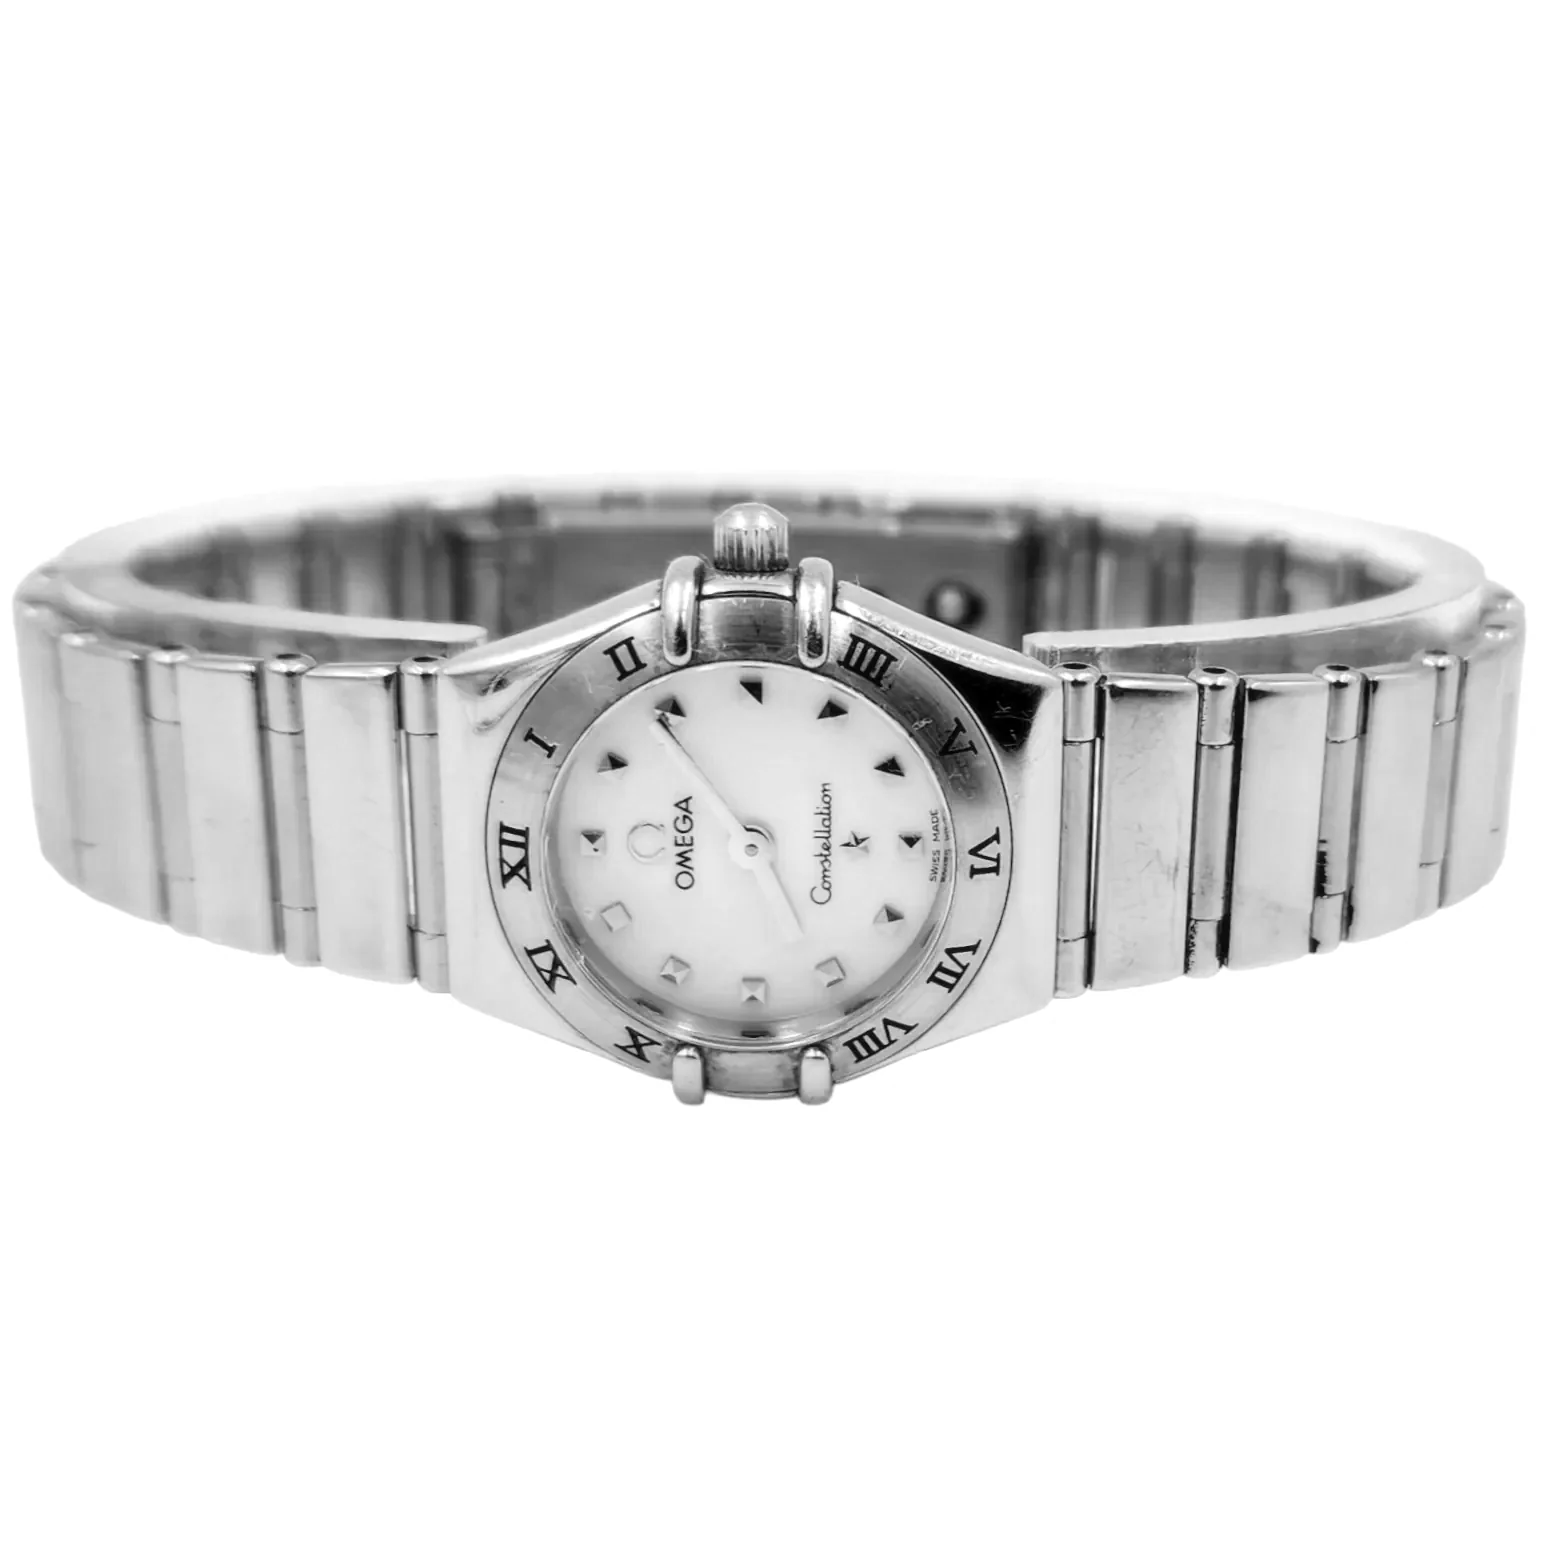 Ladies Omega 22mm Constellation Stainless Steel Watch with Mother of Pearl Dial and Roman Numeral Bezel. (Pre-Owned)